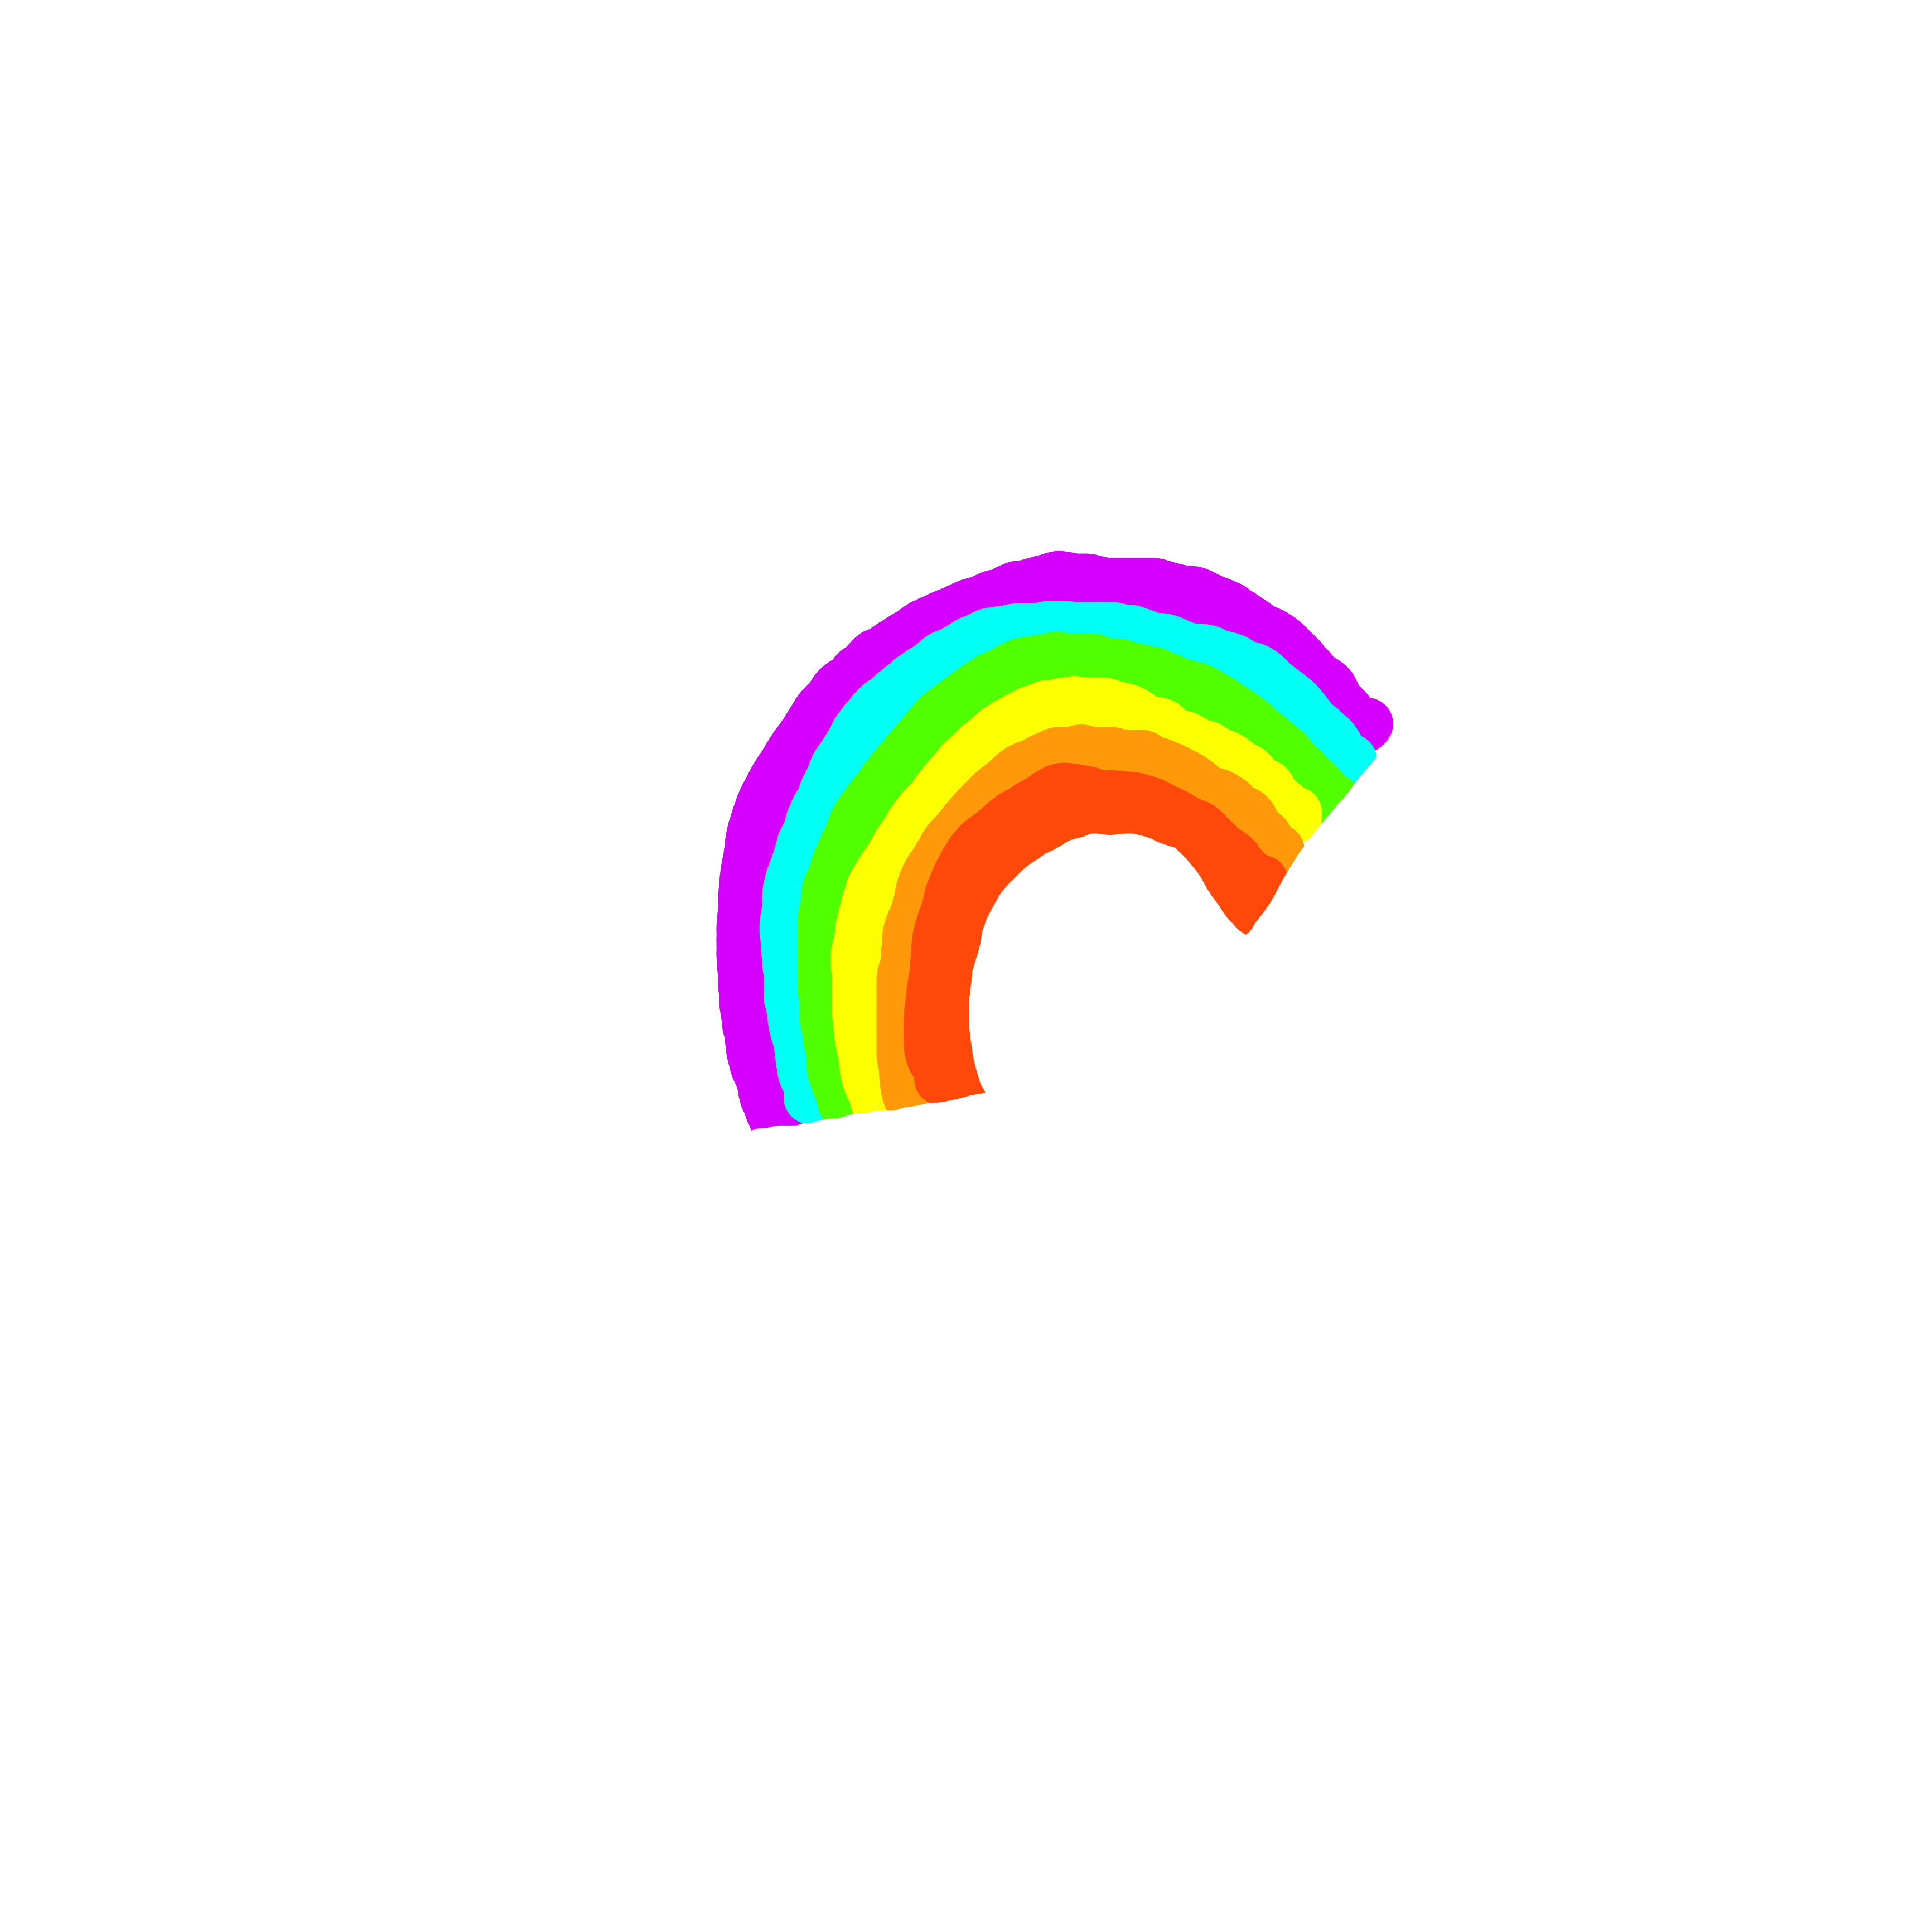 Rainbow Aesthetic PNG Images Transparent Background | PNG Play